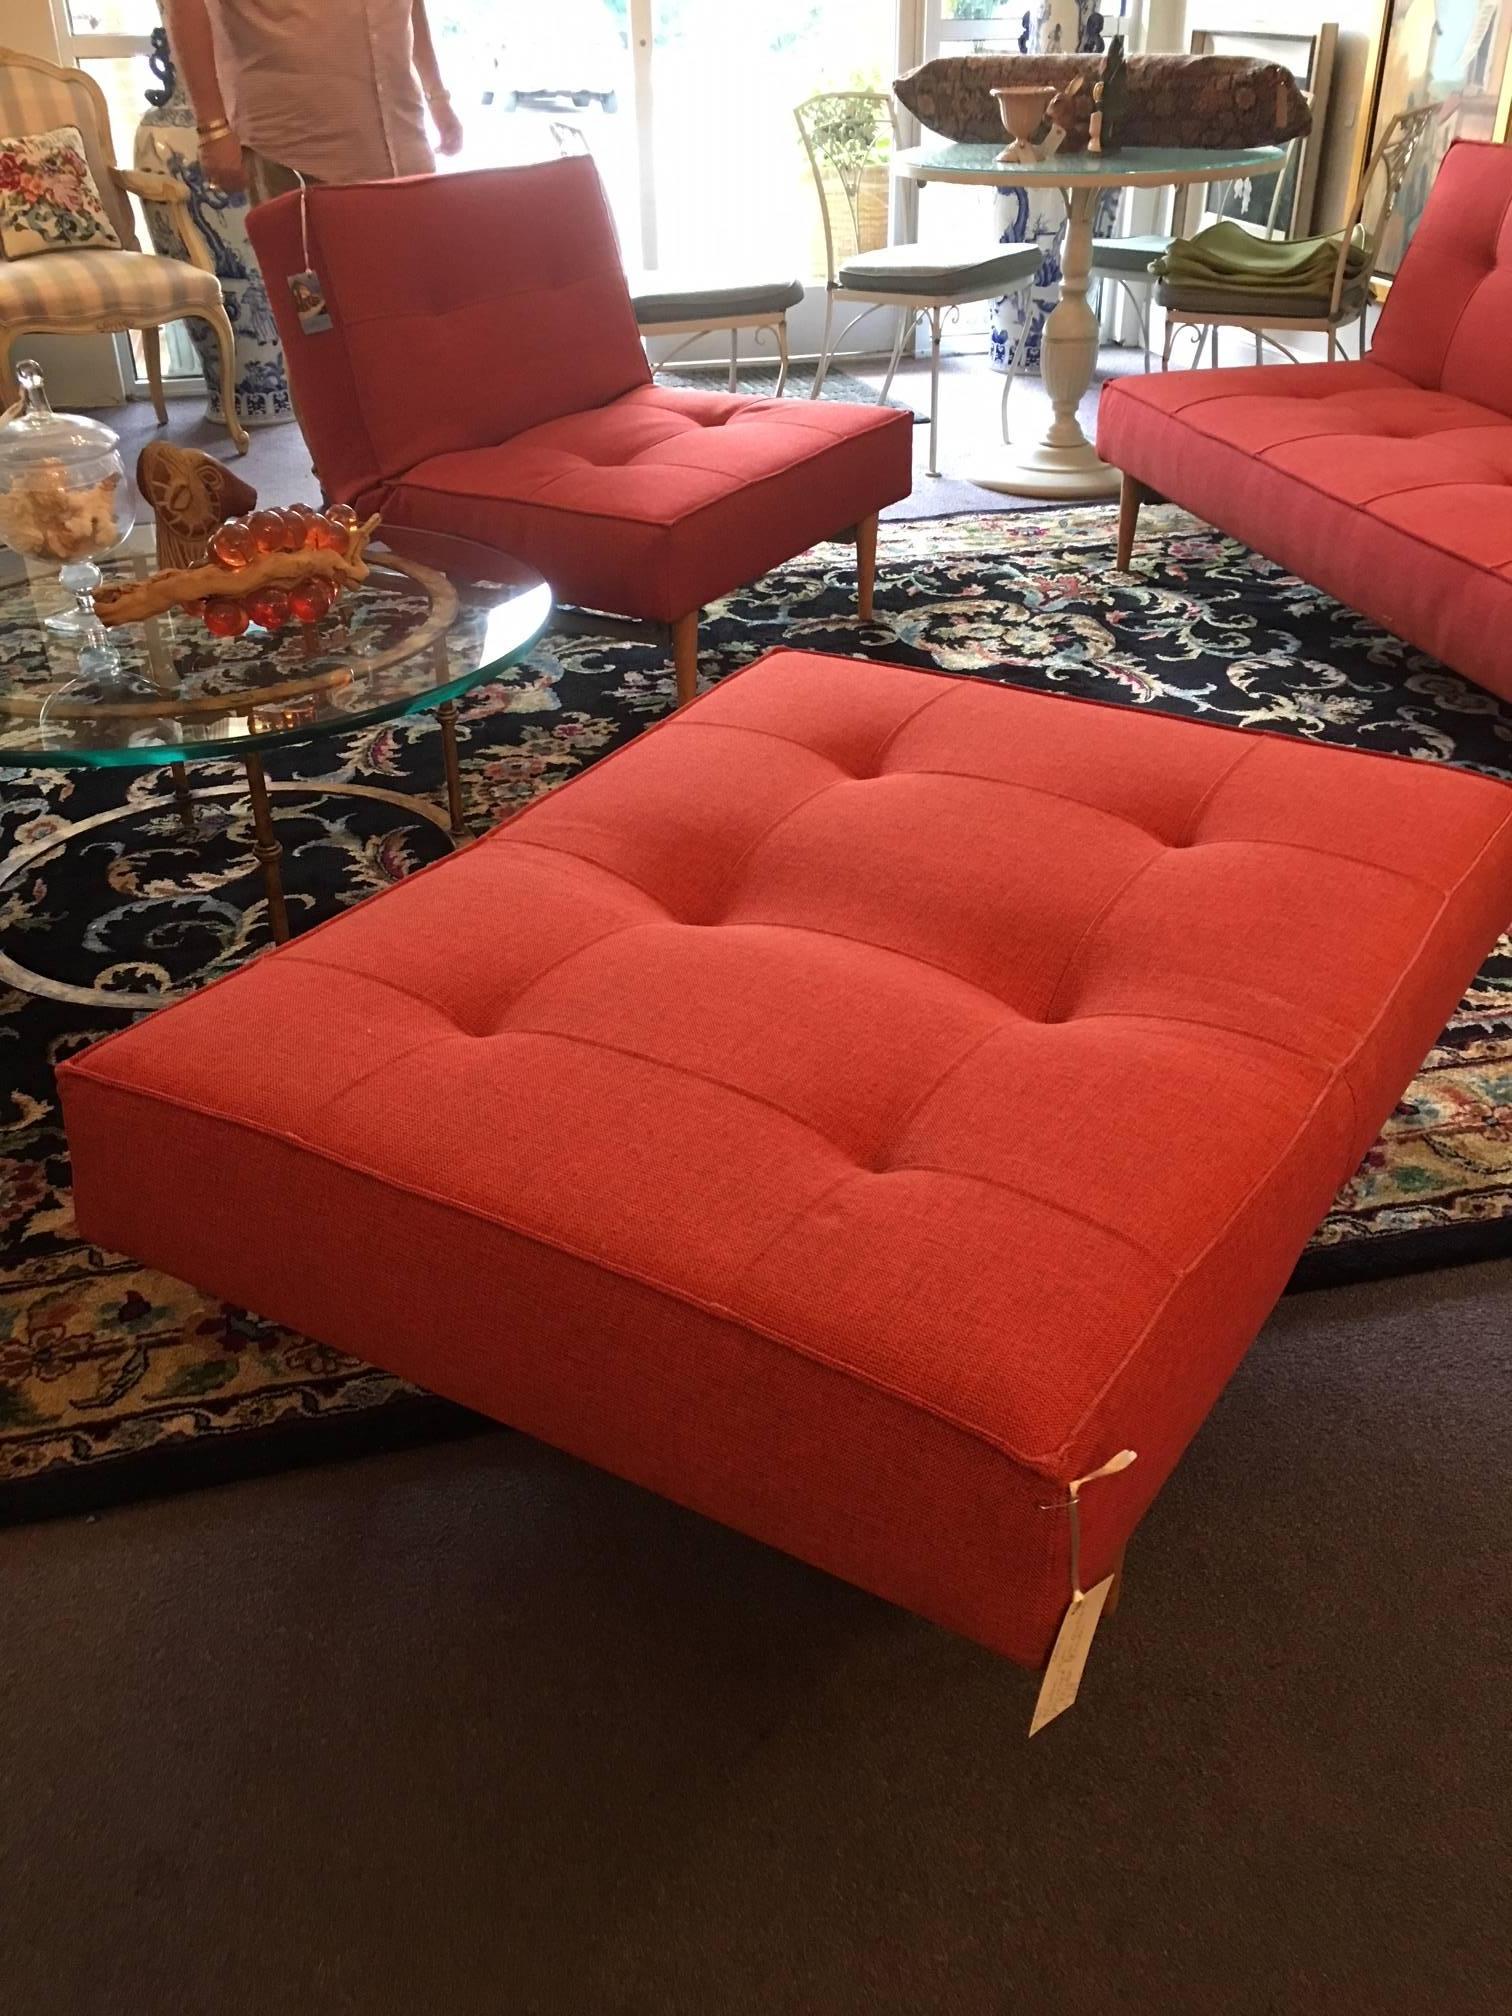 The sofa has sold.  The two chairs are available. 

This is a vintage set, perhaps hailing from the mid-late 1990s, assuming that is considered vintage. It is in excellent condition with no flaws whatsoever. The two chairs recline completely. Would